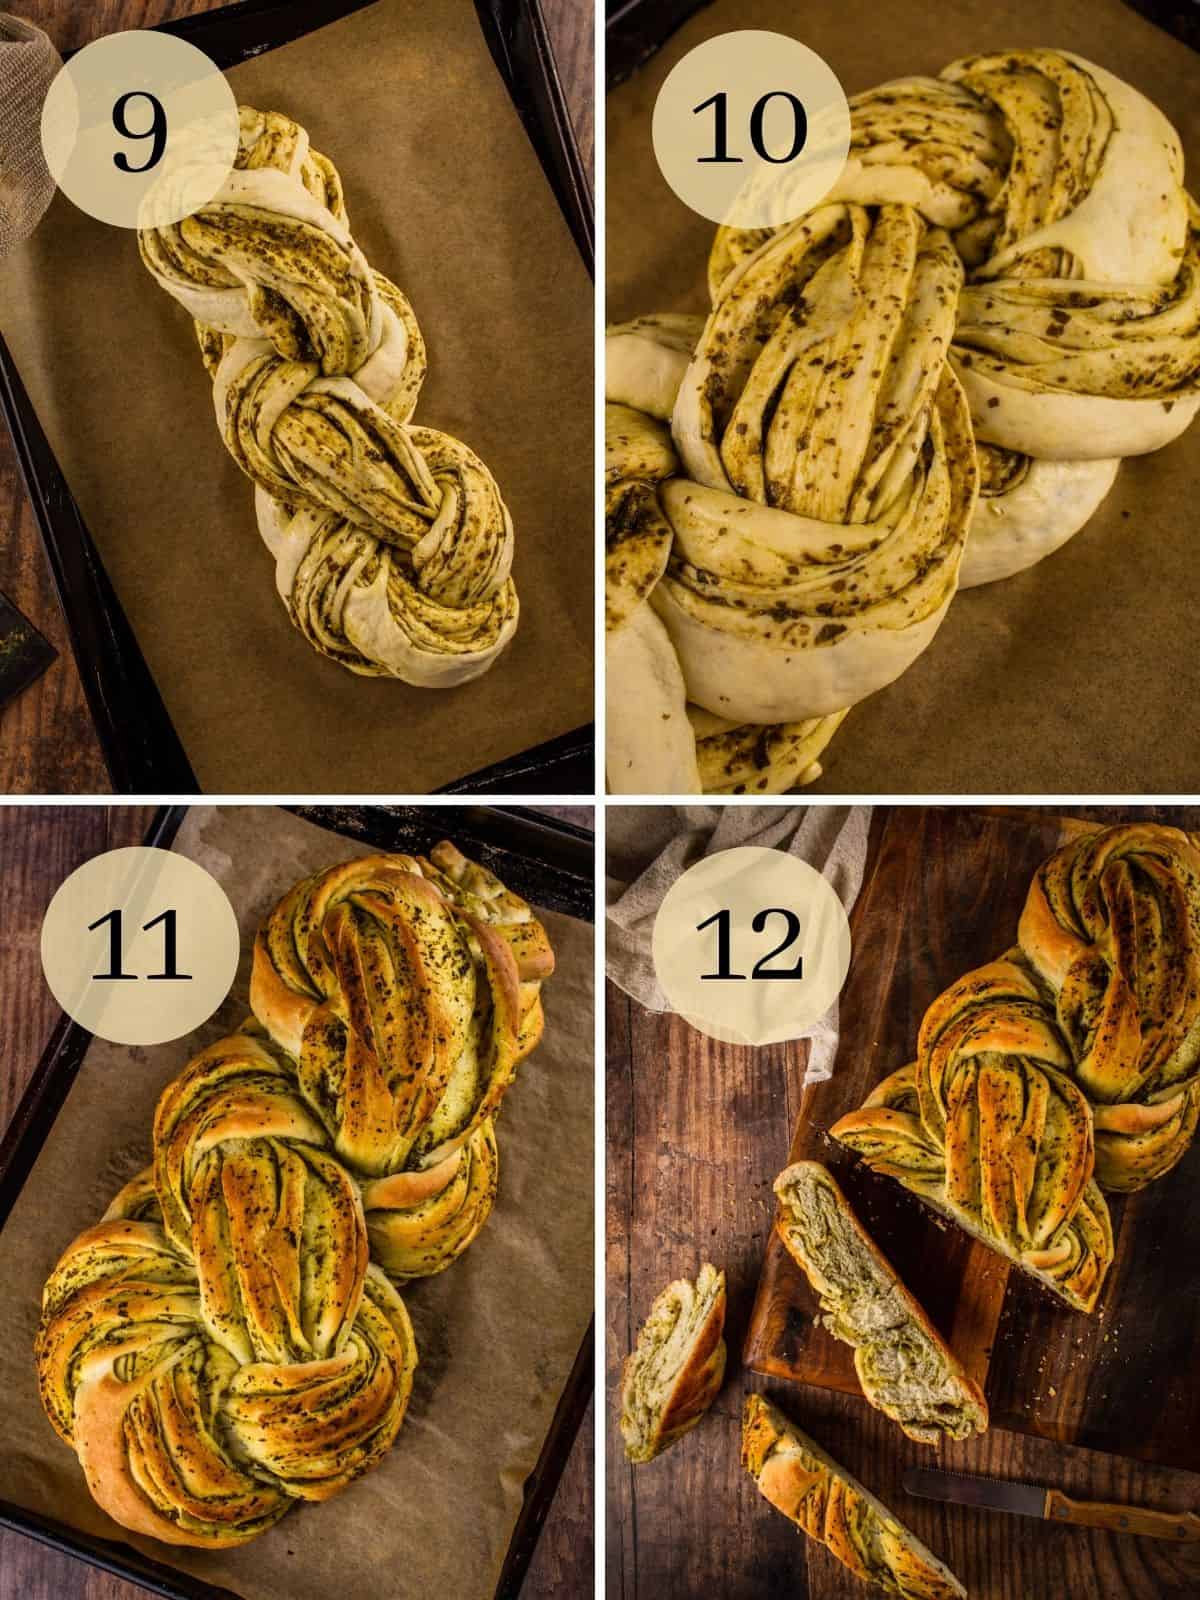 braided bread with pesto, risen braided pesto bread, baked loaf and sliced loaf of pesto bread